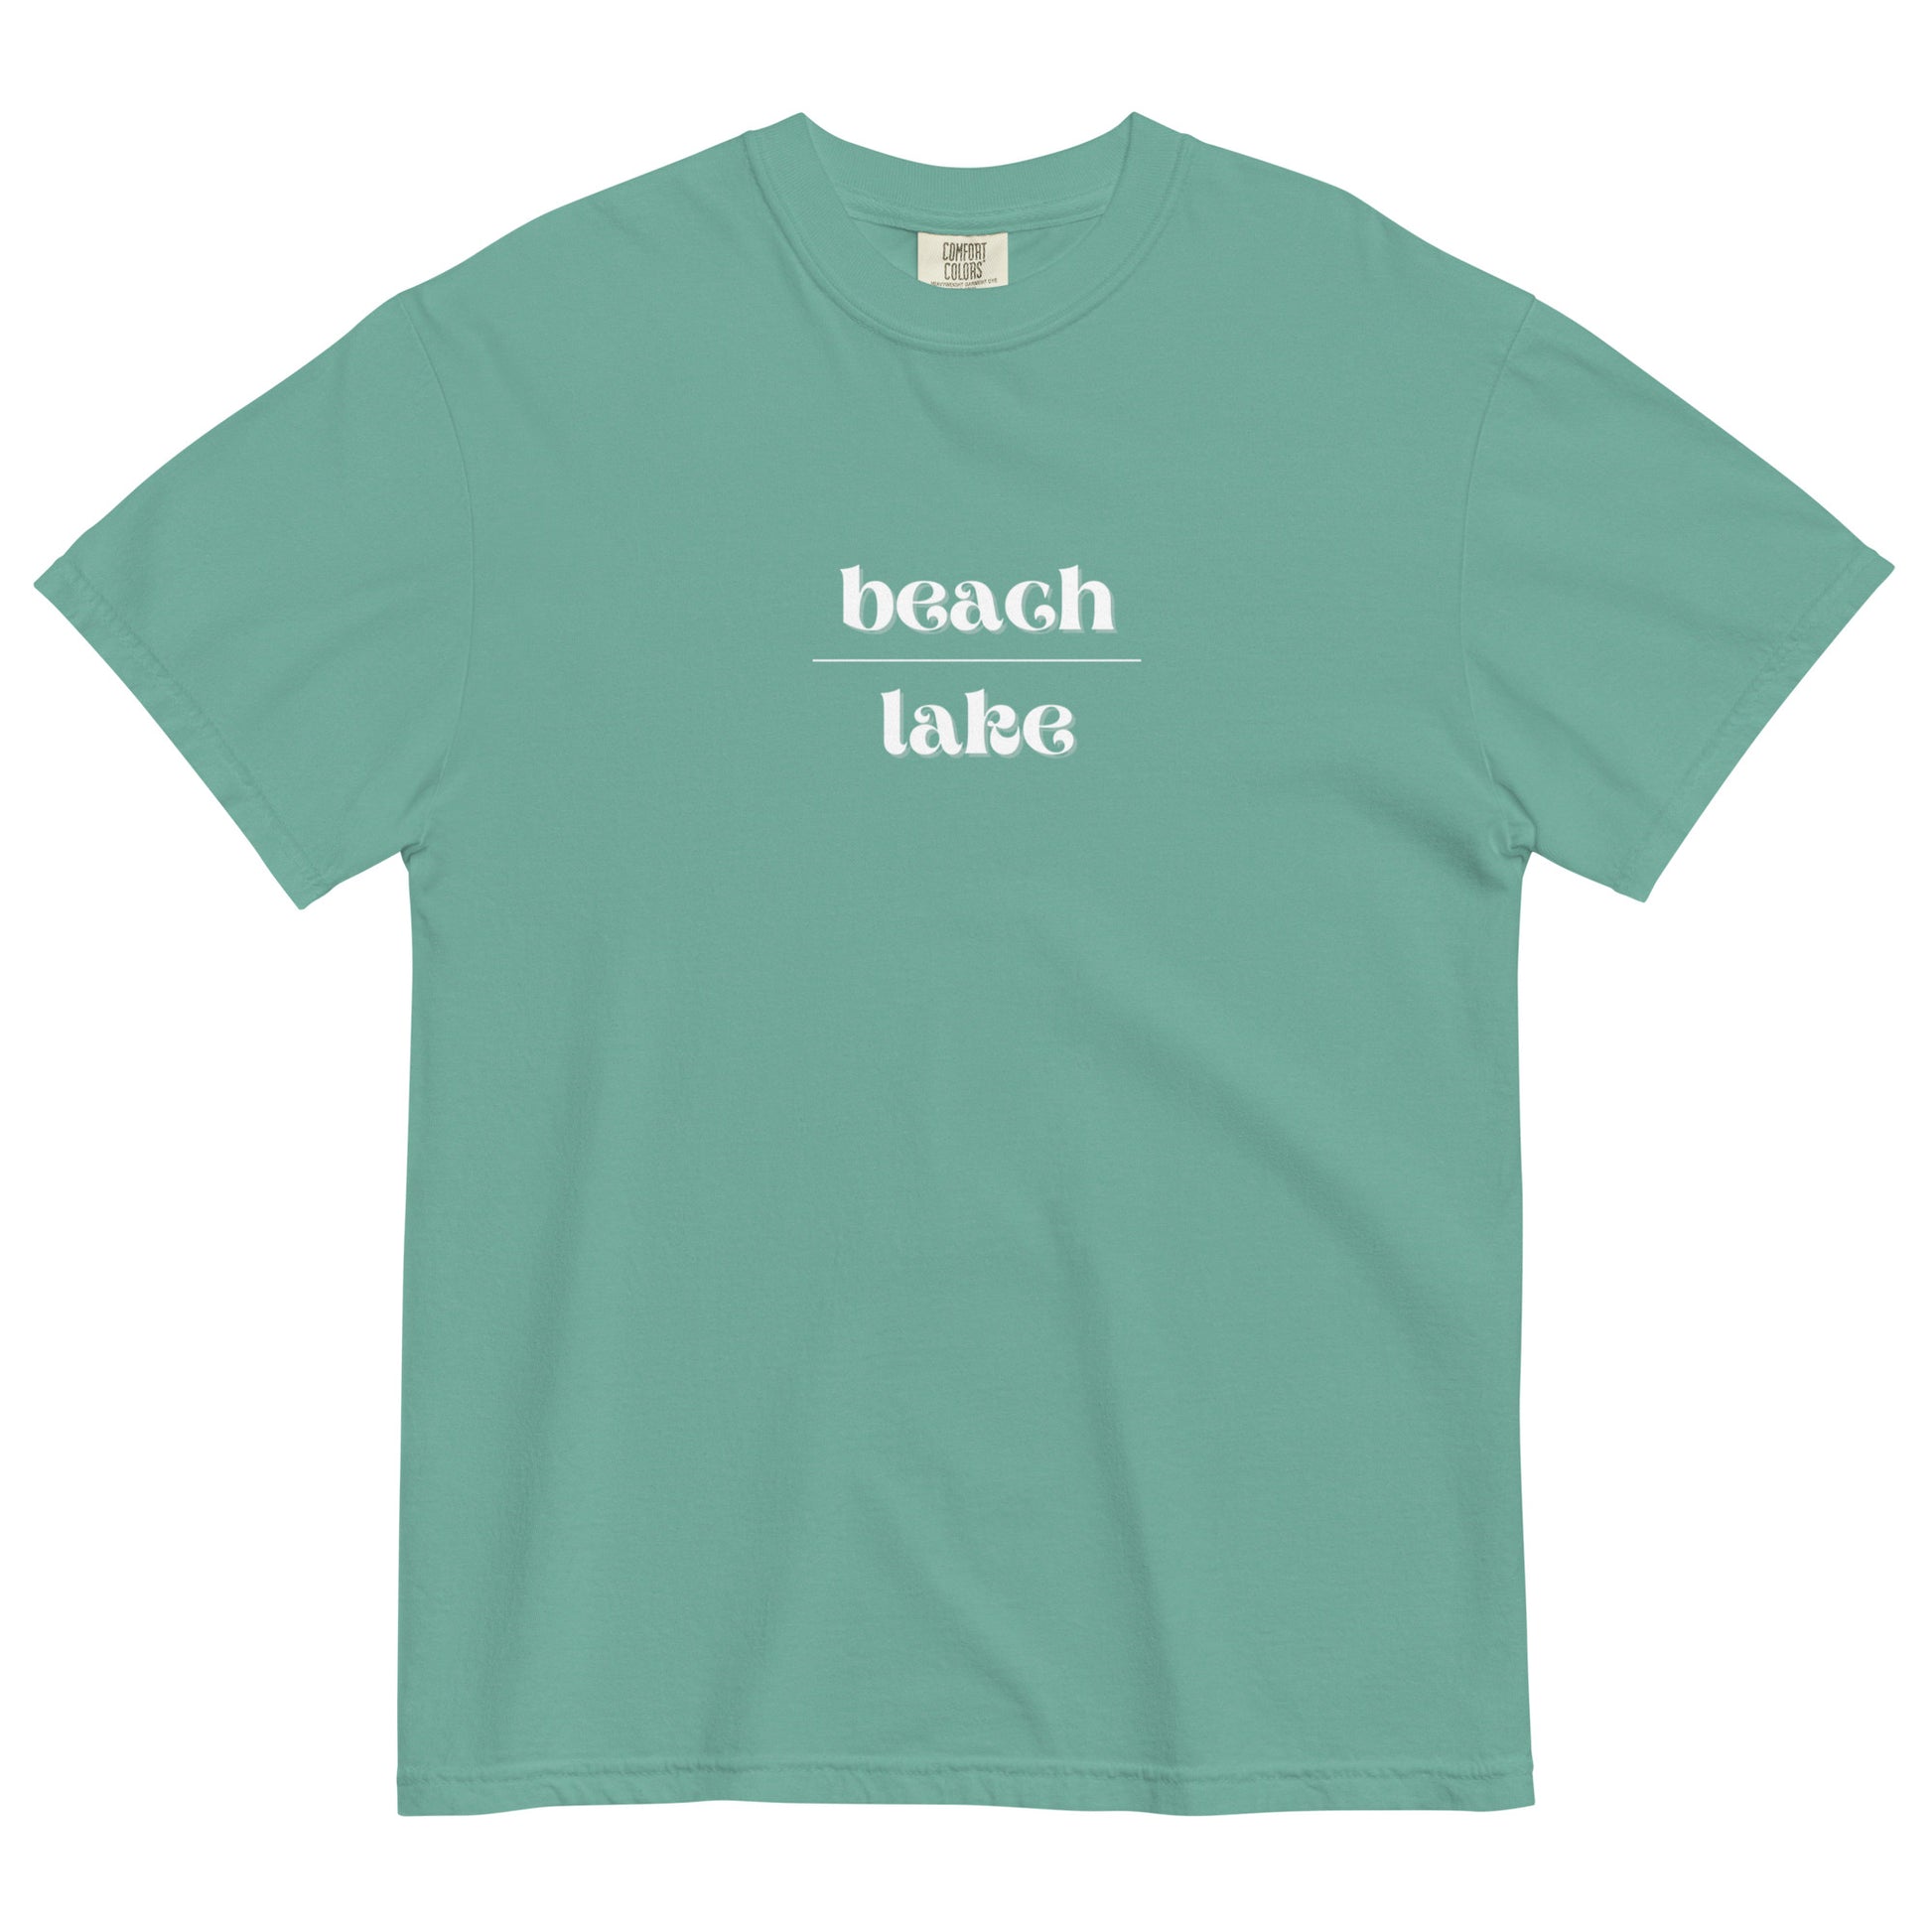 seafoam green tshirt that says "beach over lake" in white letters